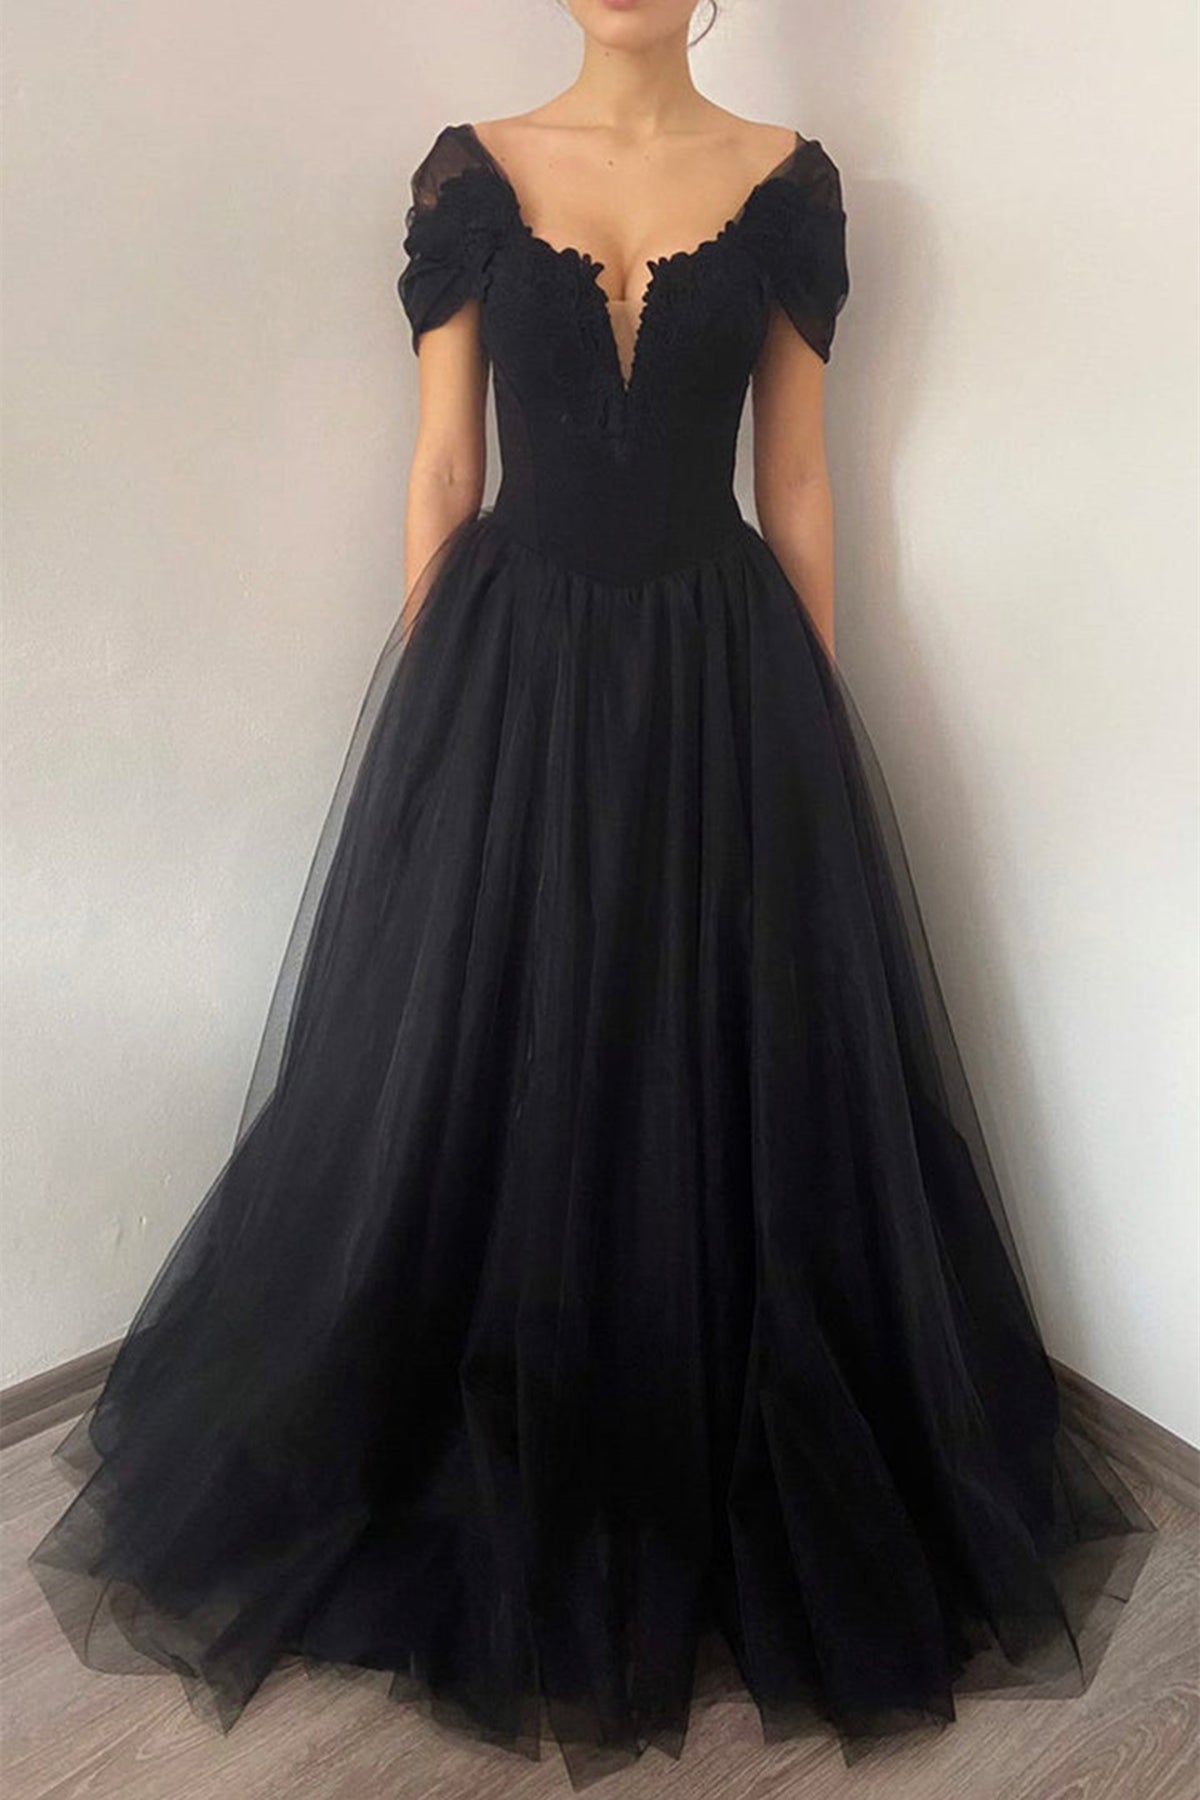 Pleated Long Black Evening Dress Modest with Dolman Sleeves - $90.9792  #MX16126 - SheProm.com